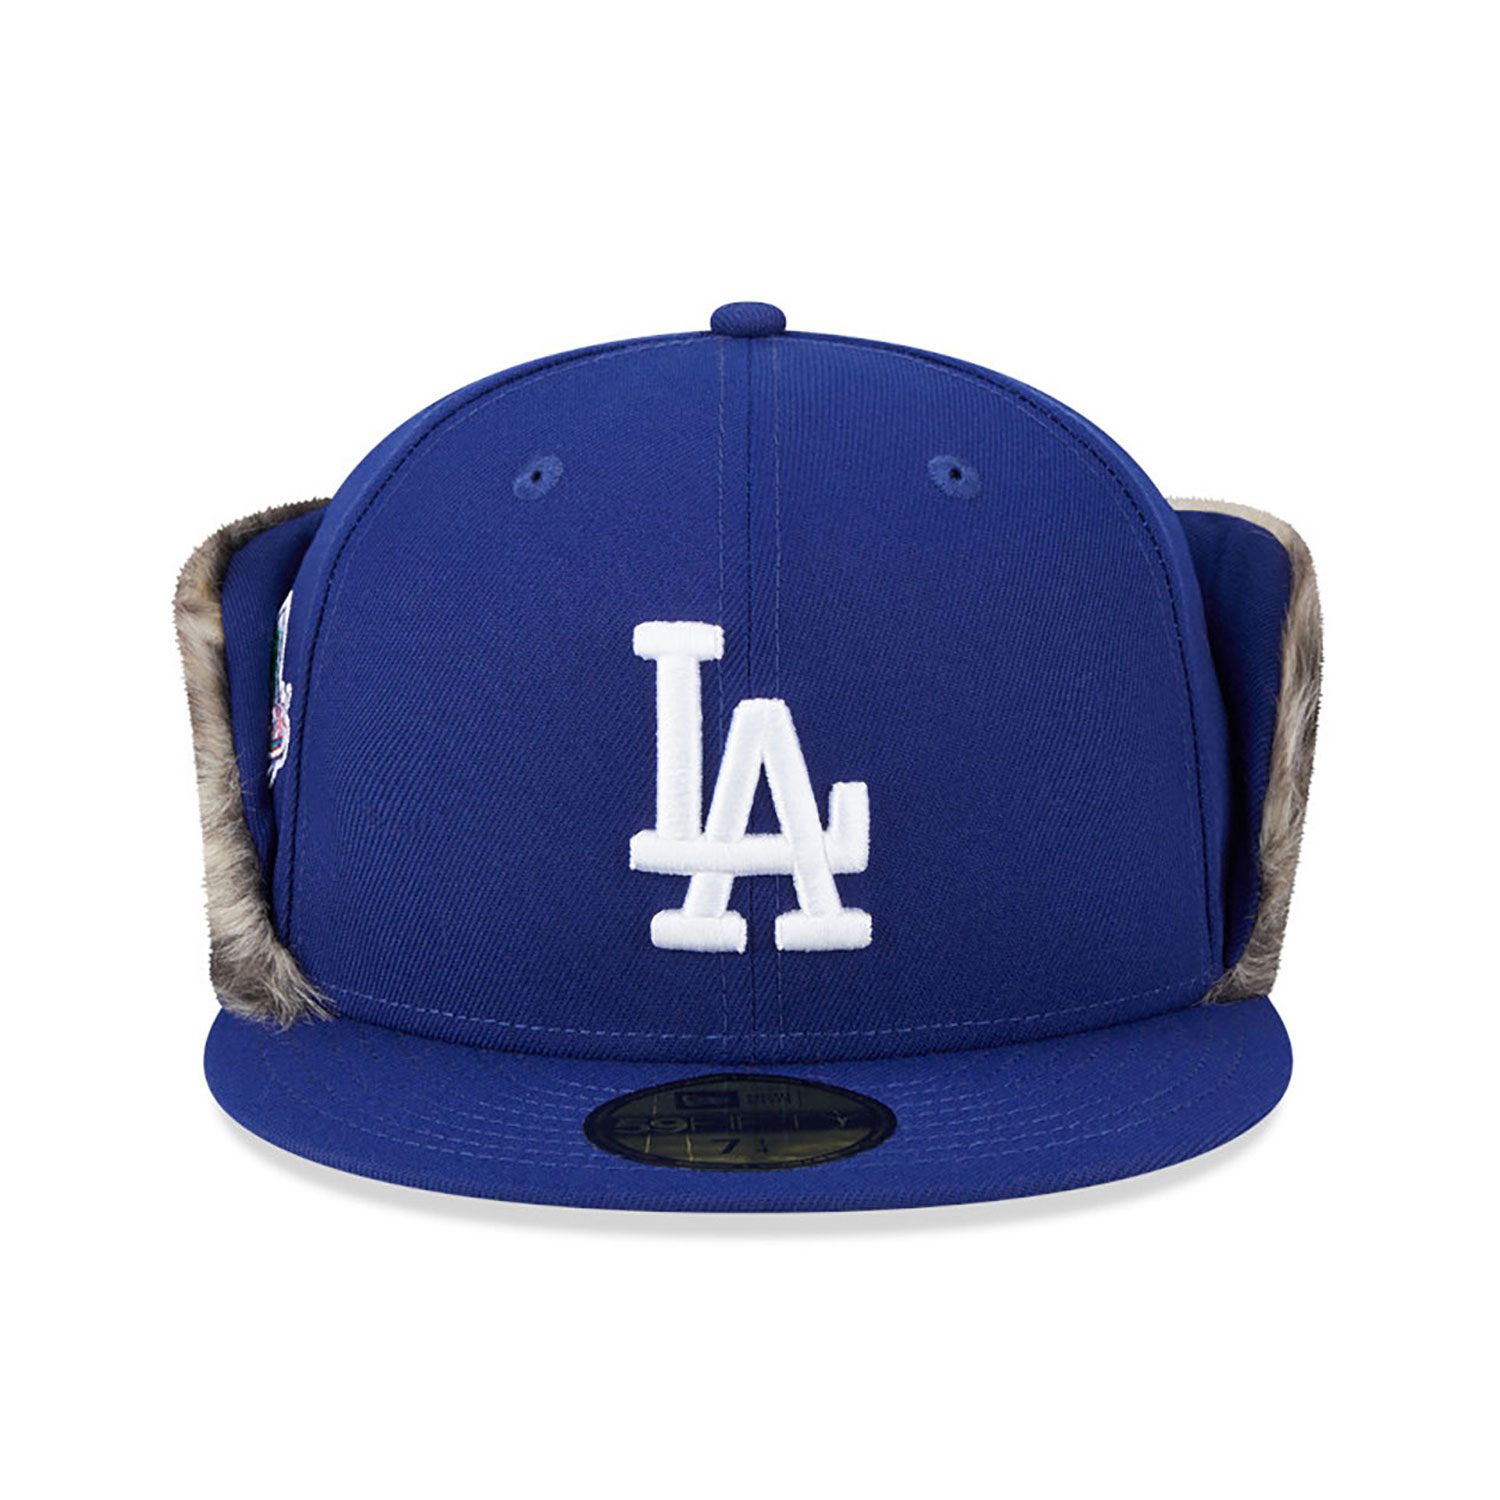 LA Dodgers MLB World Series Blue 59FIFTY Fitted Downflap Cap